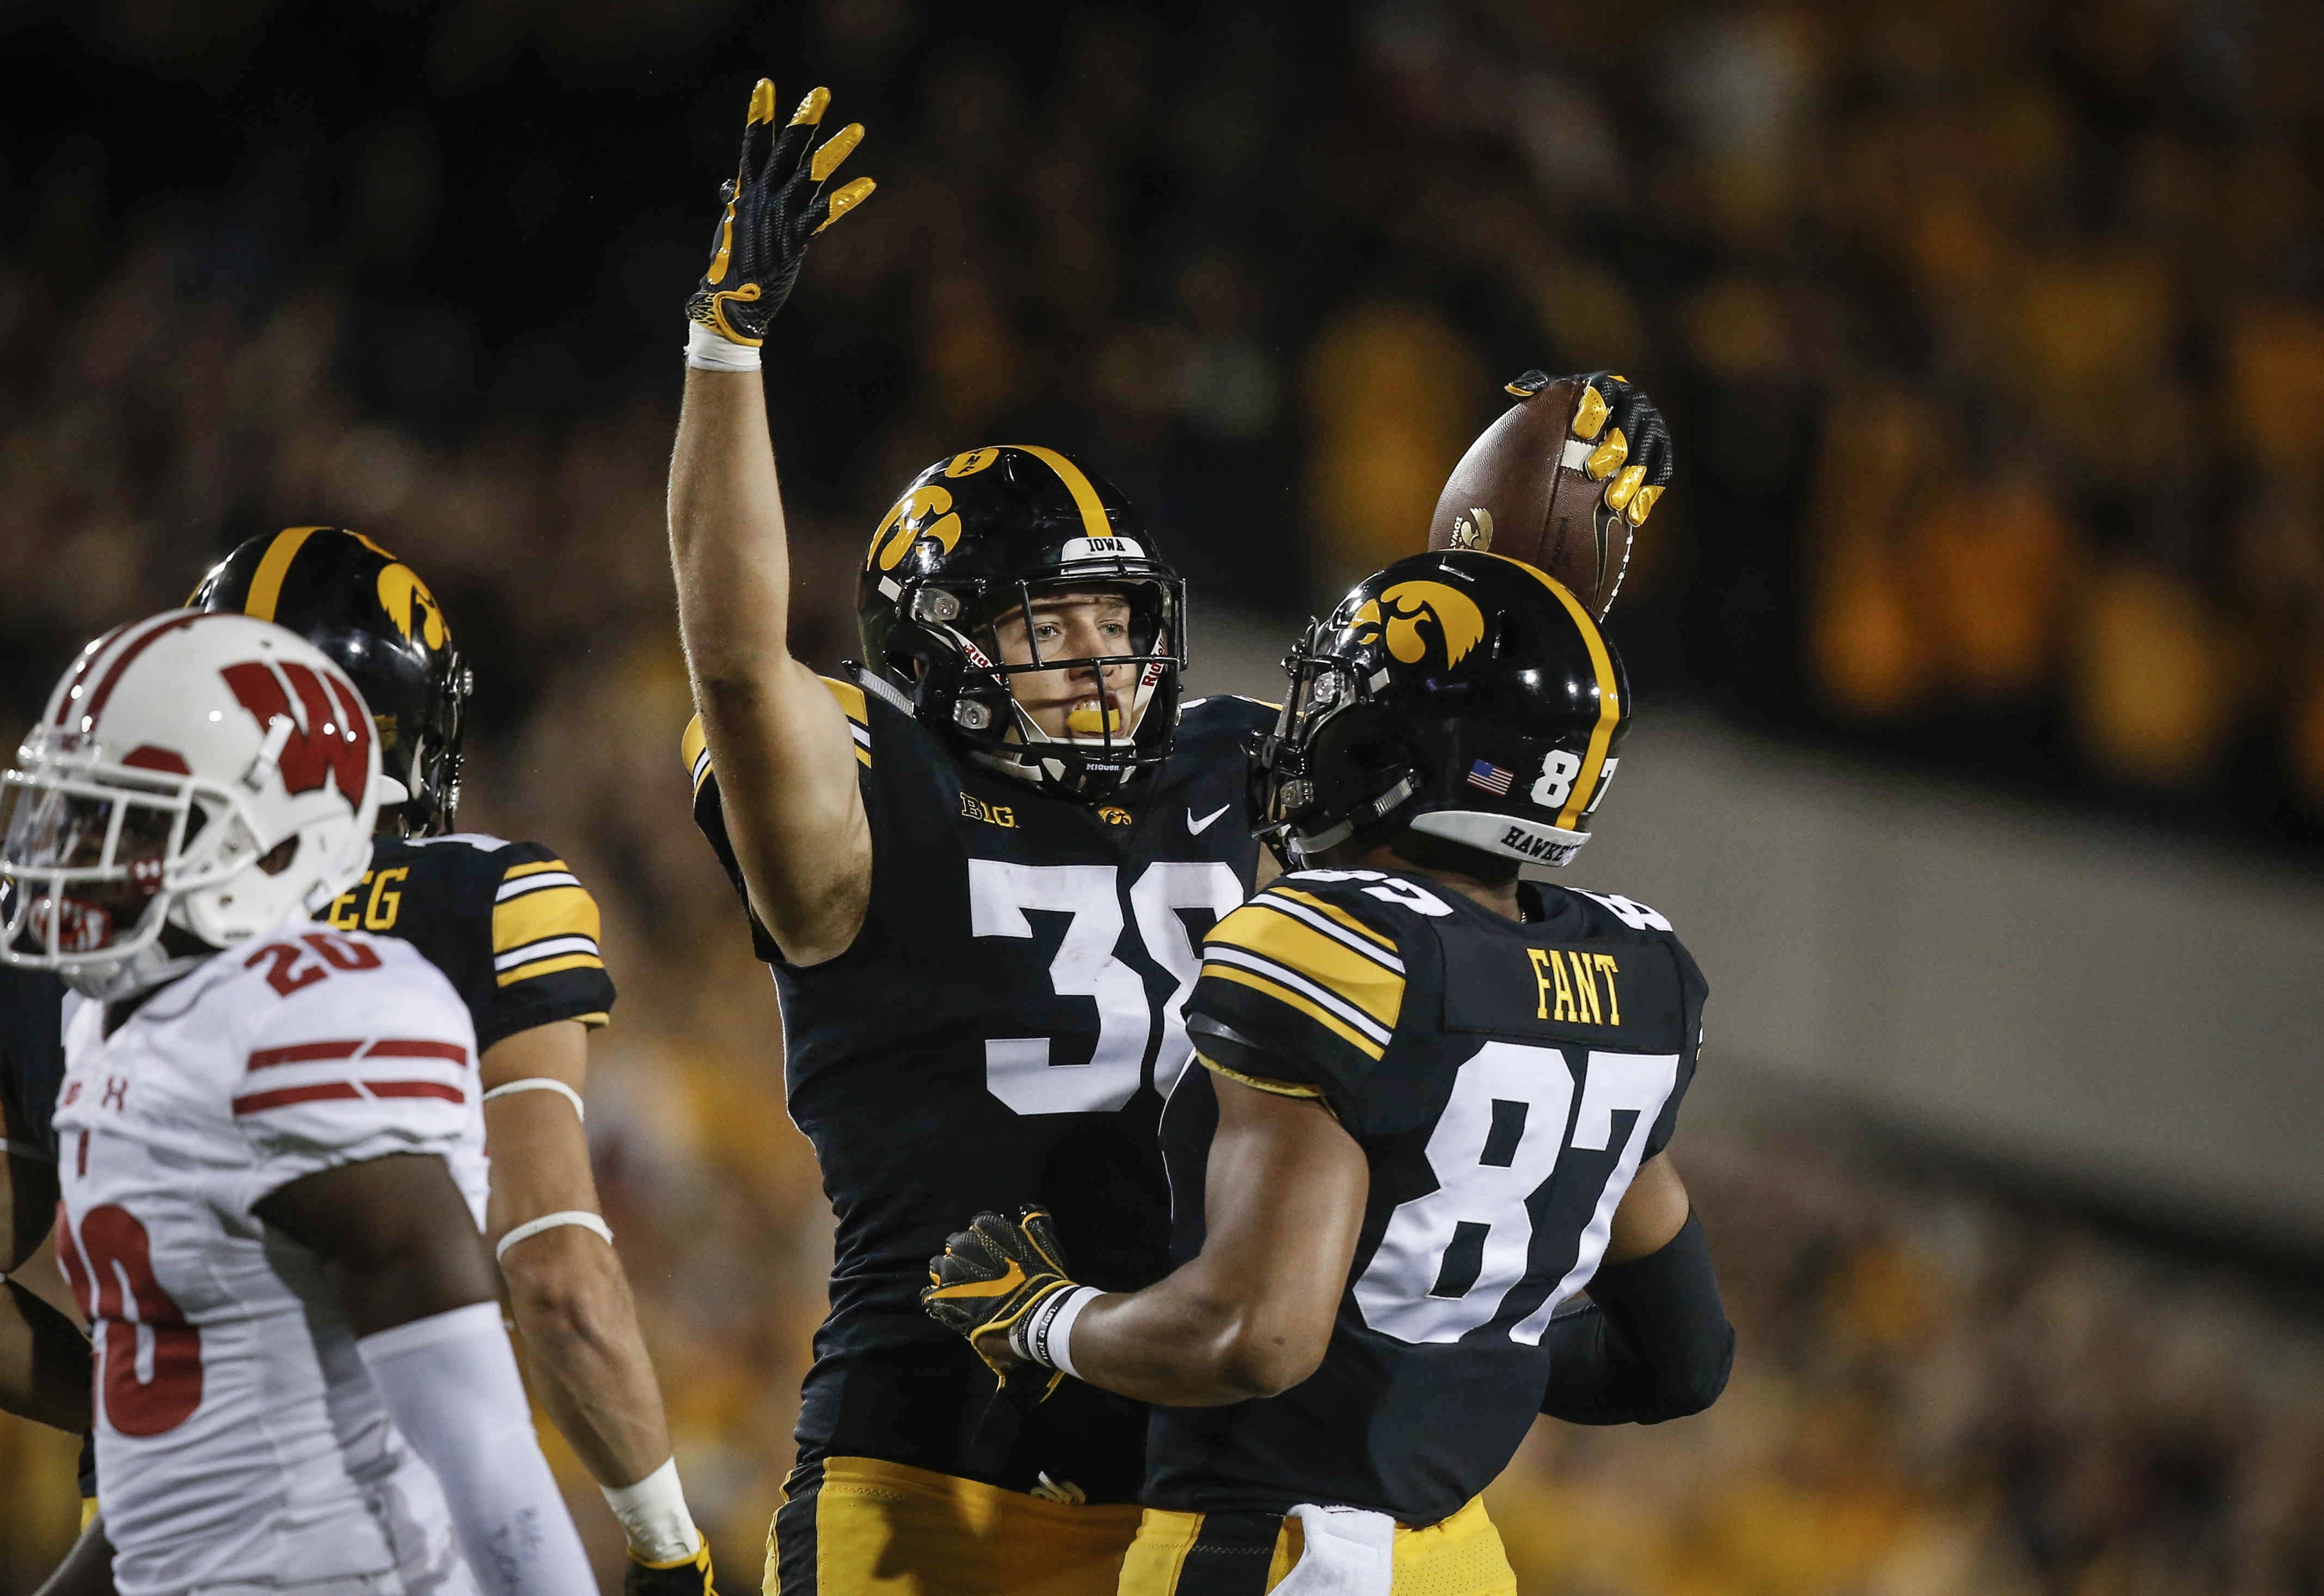 Tight end T.J. Hockenson, left, is Iowa's team leader in receiving yards (287). Tight end Noah Fant, right, is Iowa's leader in receptions (19) and touchdowns (five). The pair has combined for 37 catches for 483 yards and seven receiving touchdowns. Hockenson also has a rushing TD.